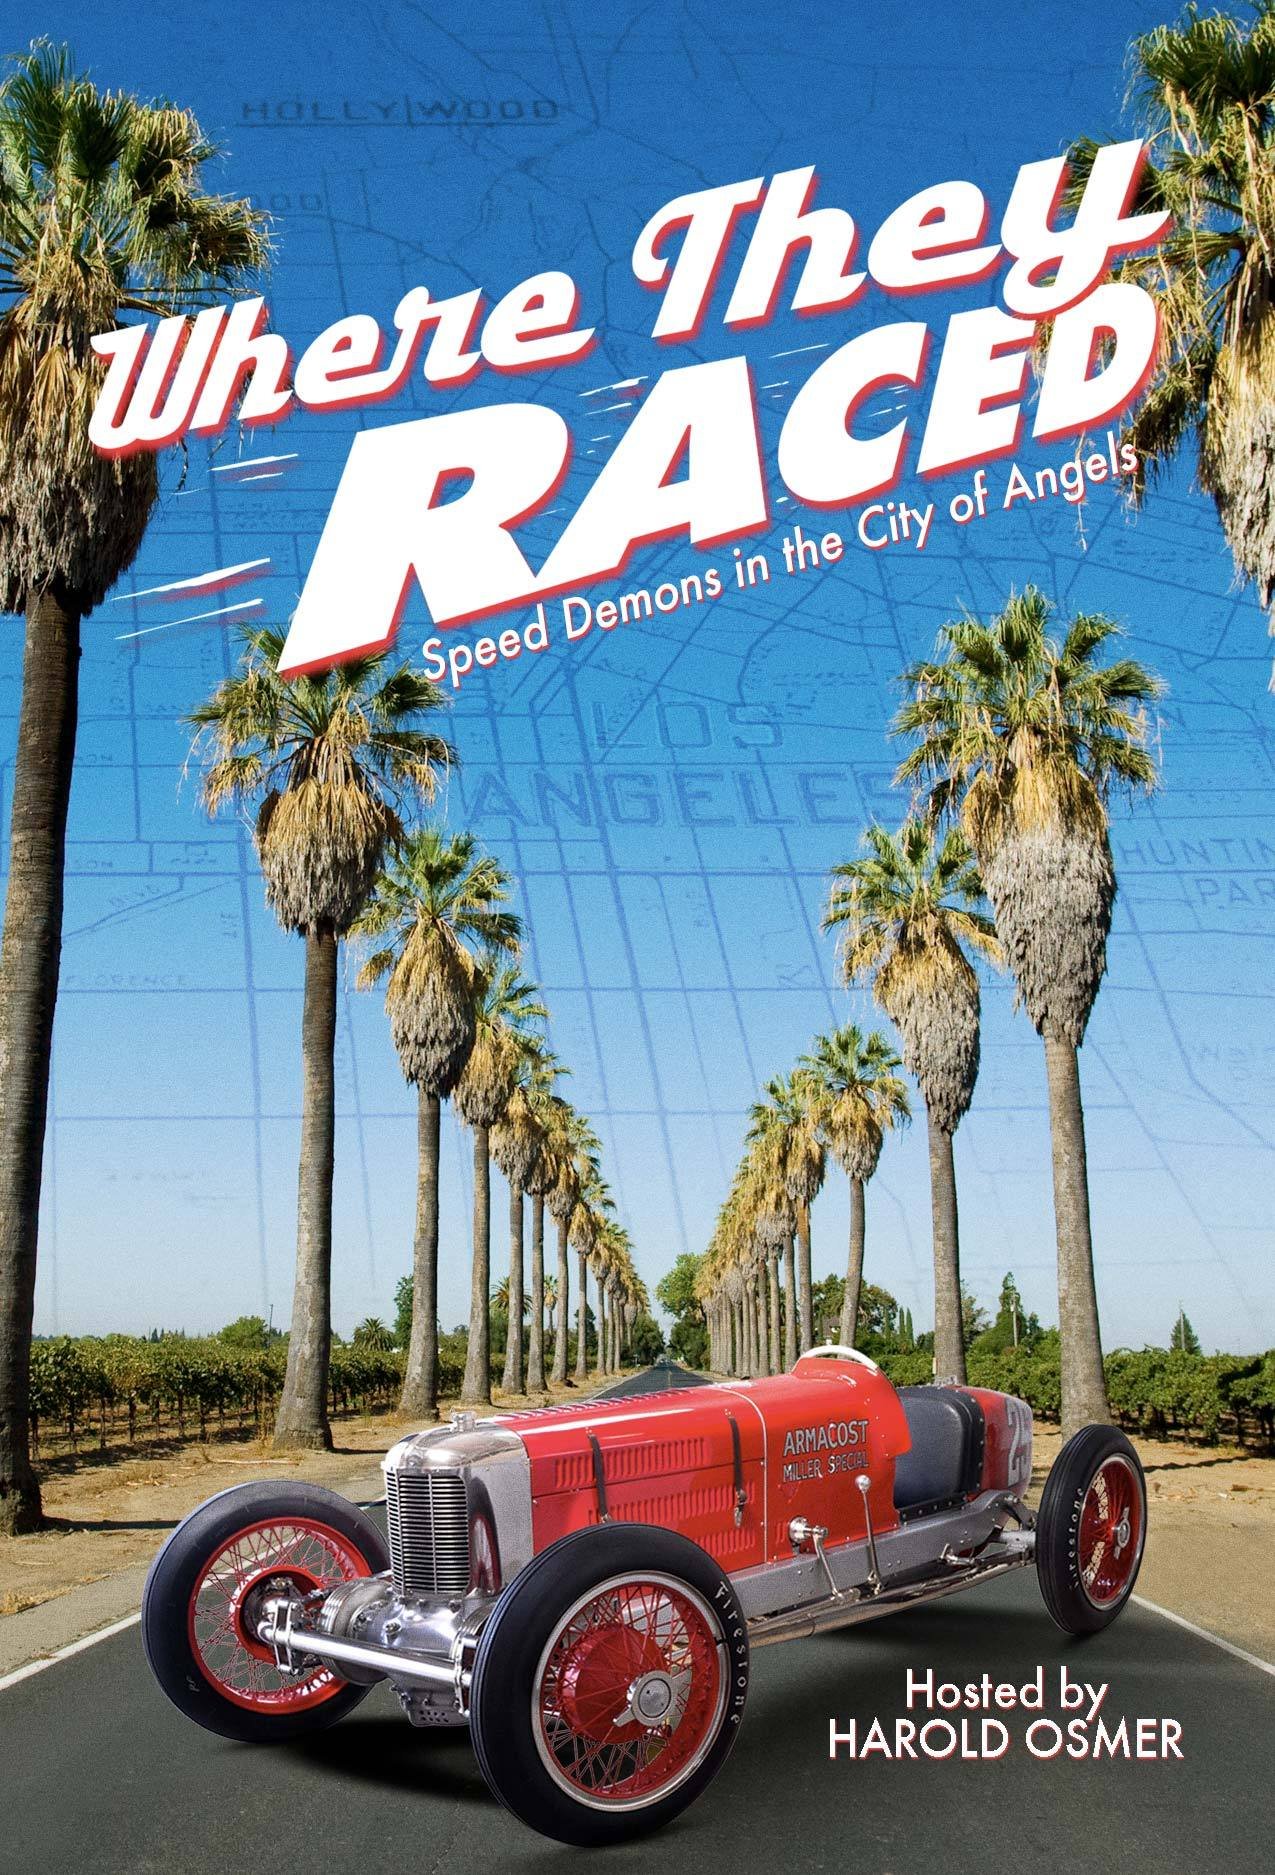 Where They Raced